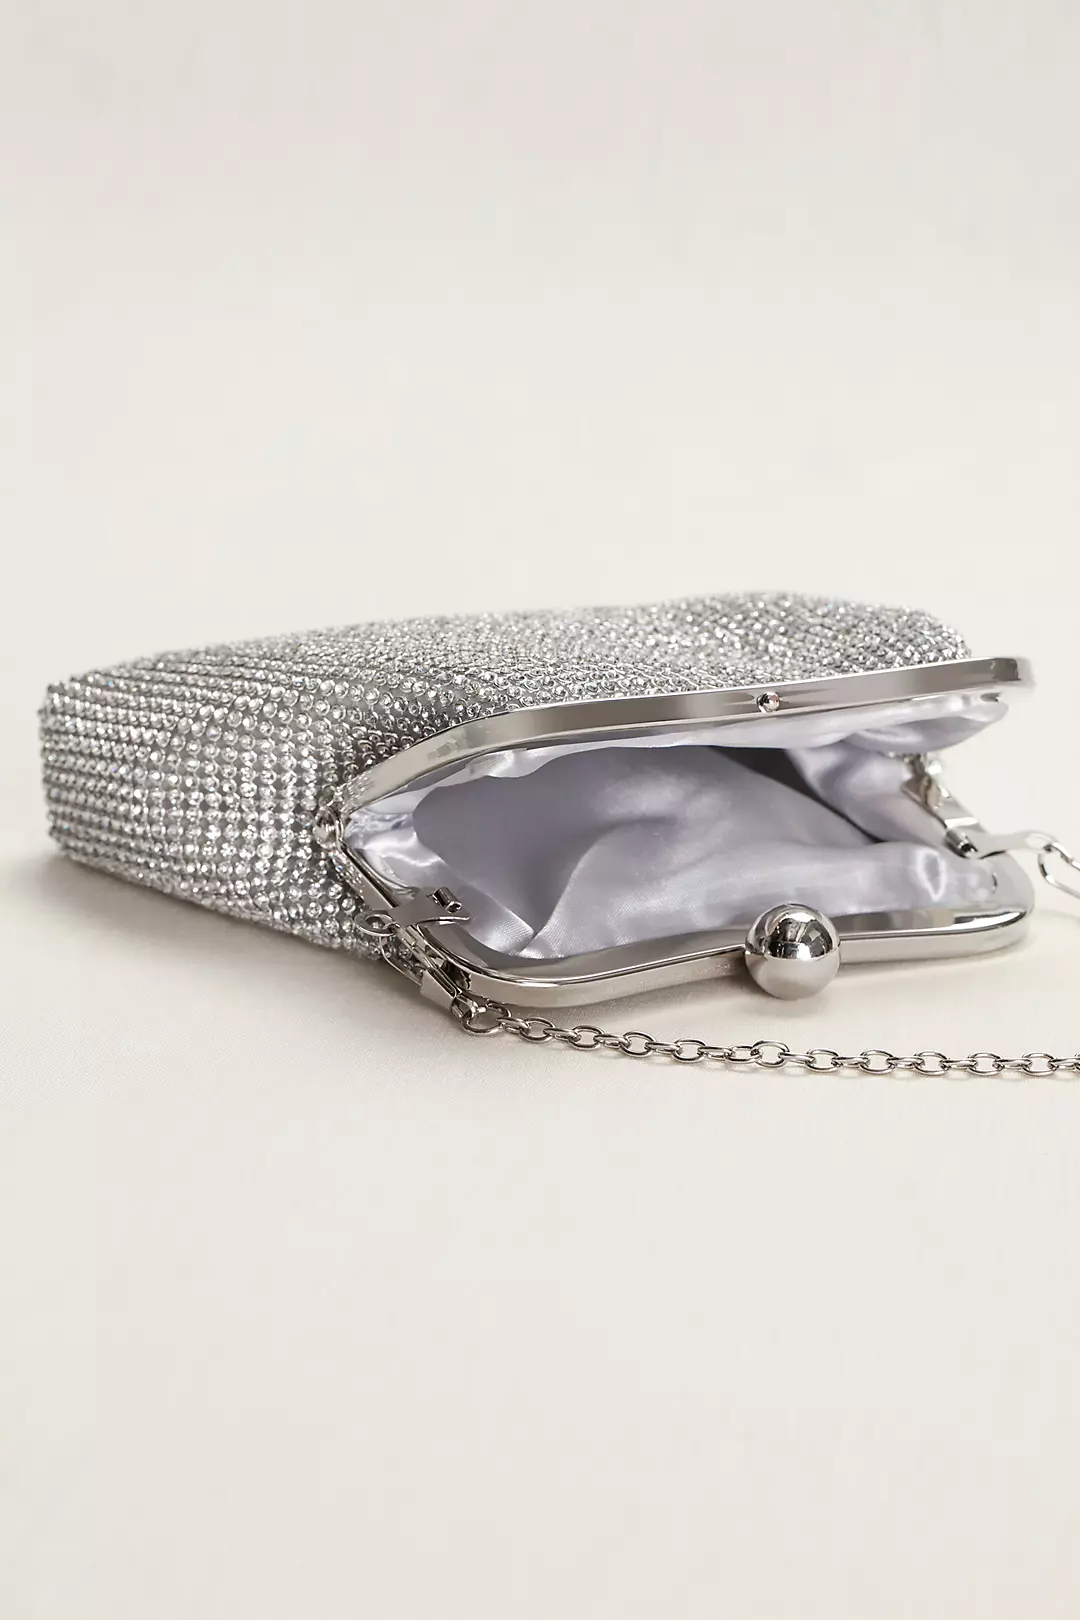 Crystal Mesh Coin Purse Image 3